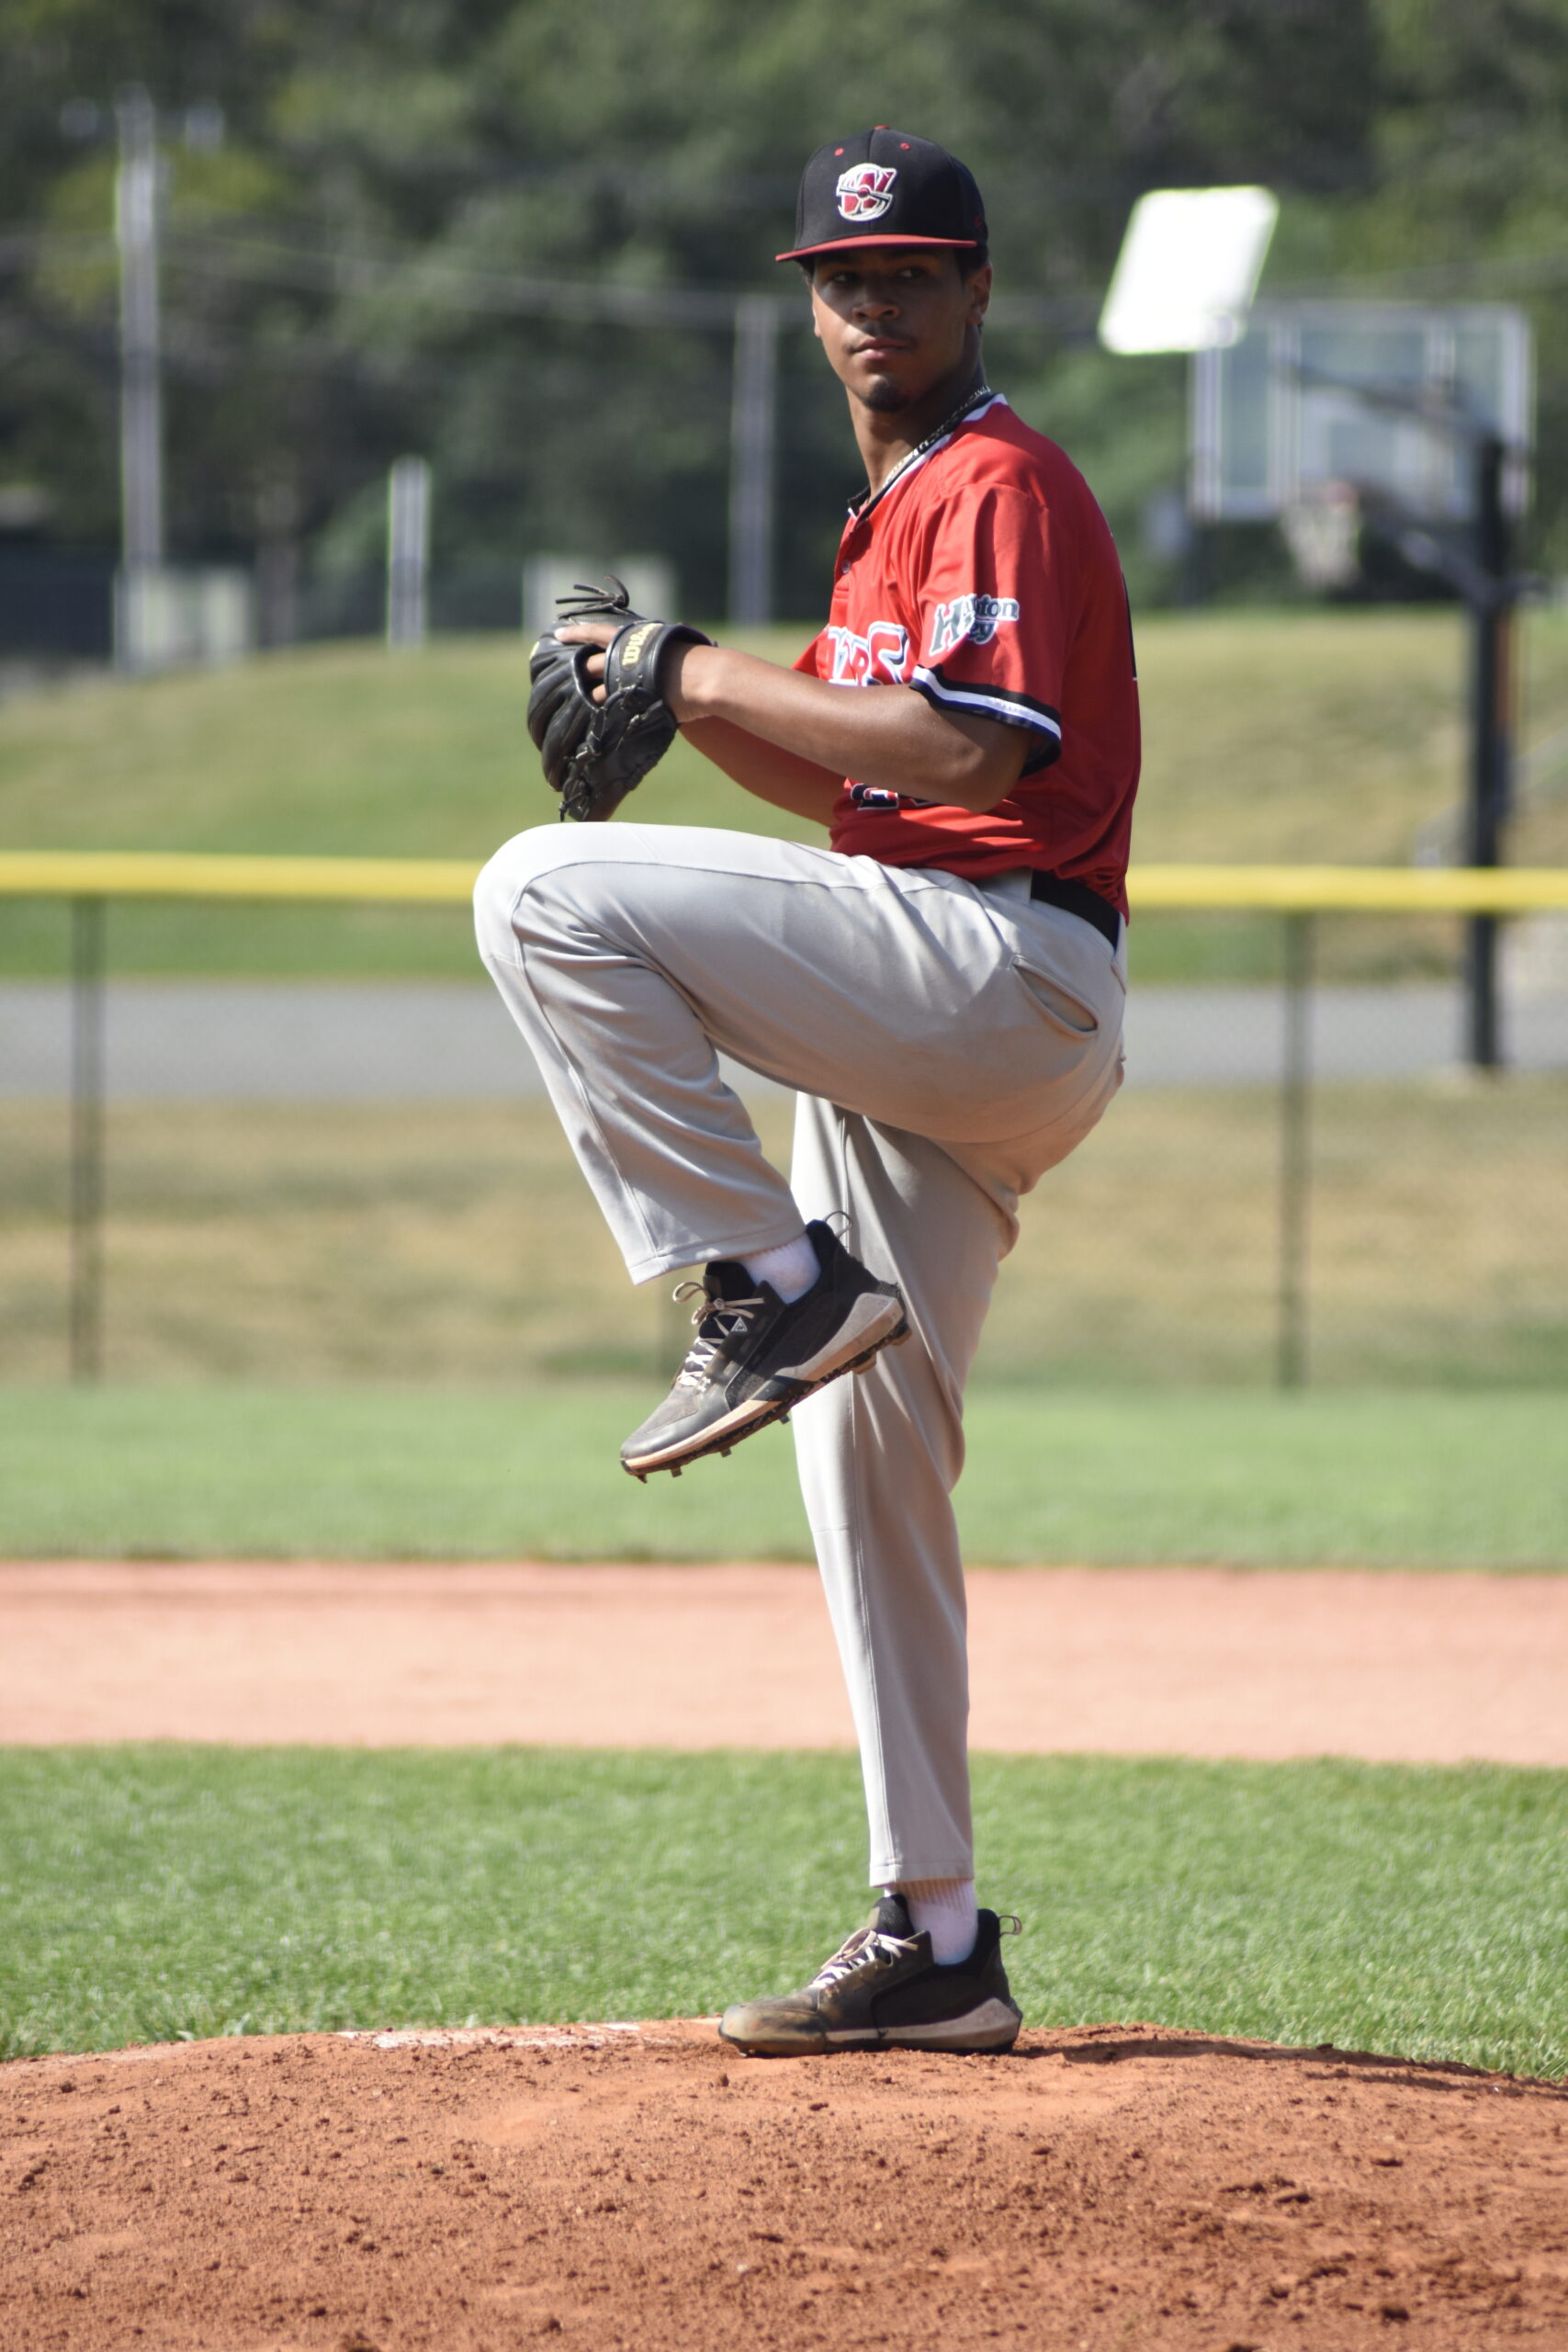 Jomari Rosa (UMass-Lowell) started on the mound for the Aviators in game two of the series on July 27.    DREW BUDD